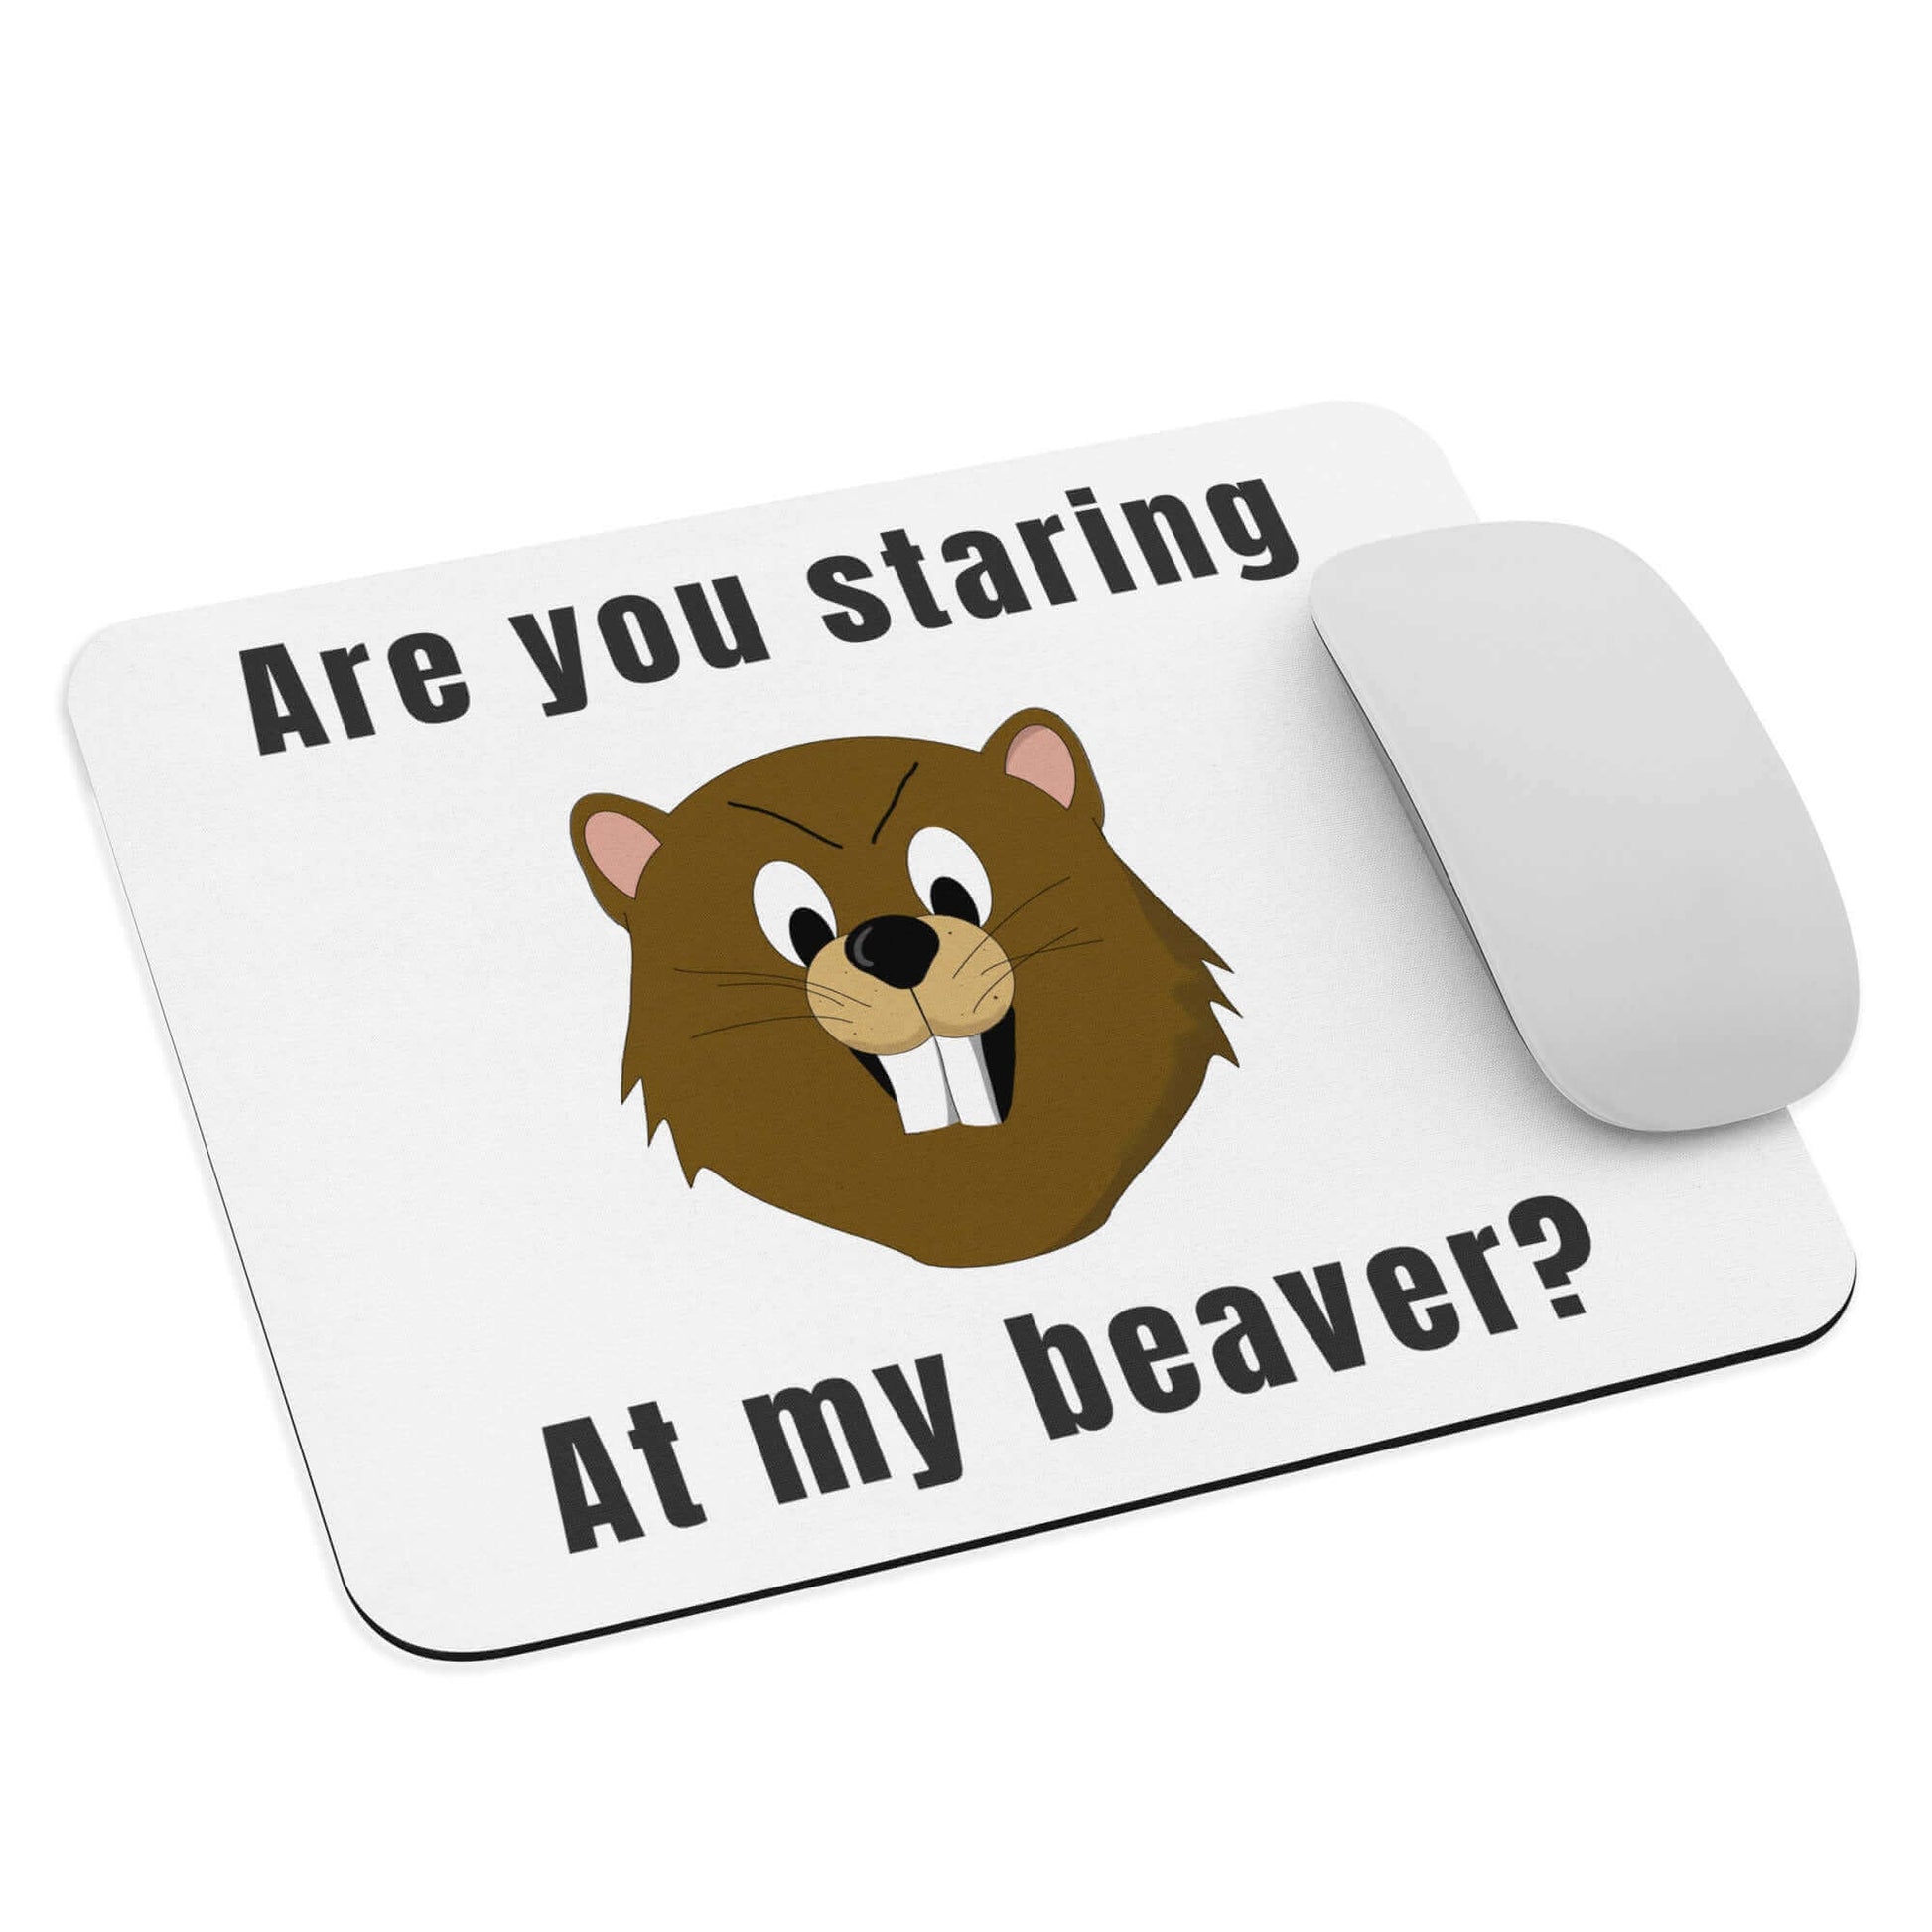 Are you staring at my beaver - Mouse pad bearded clam fathers day funny mouse pad gift for her gift for him gift for mom lady parts meat flaps pink taco pussy vagina